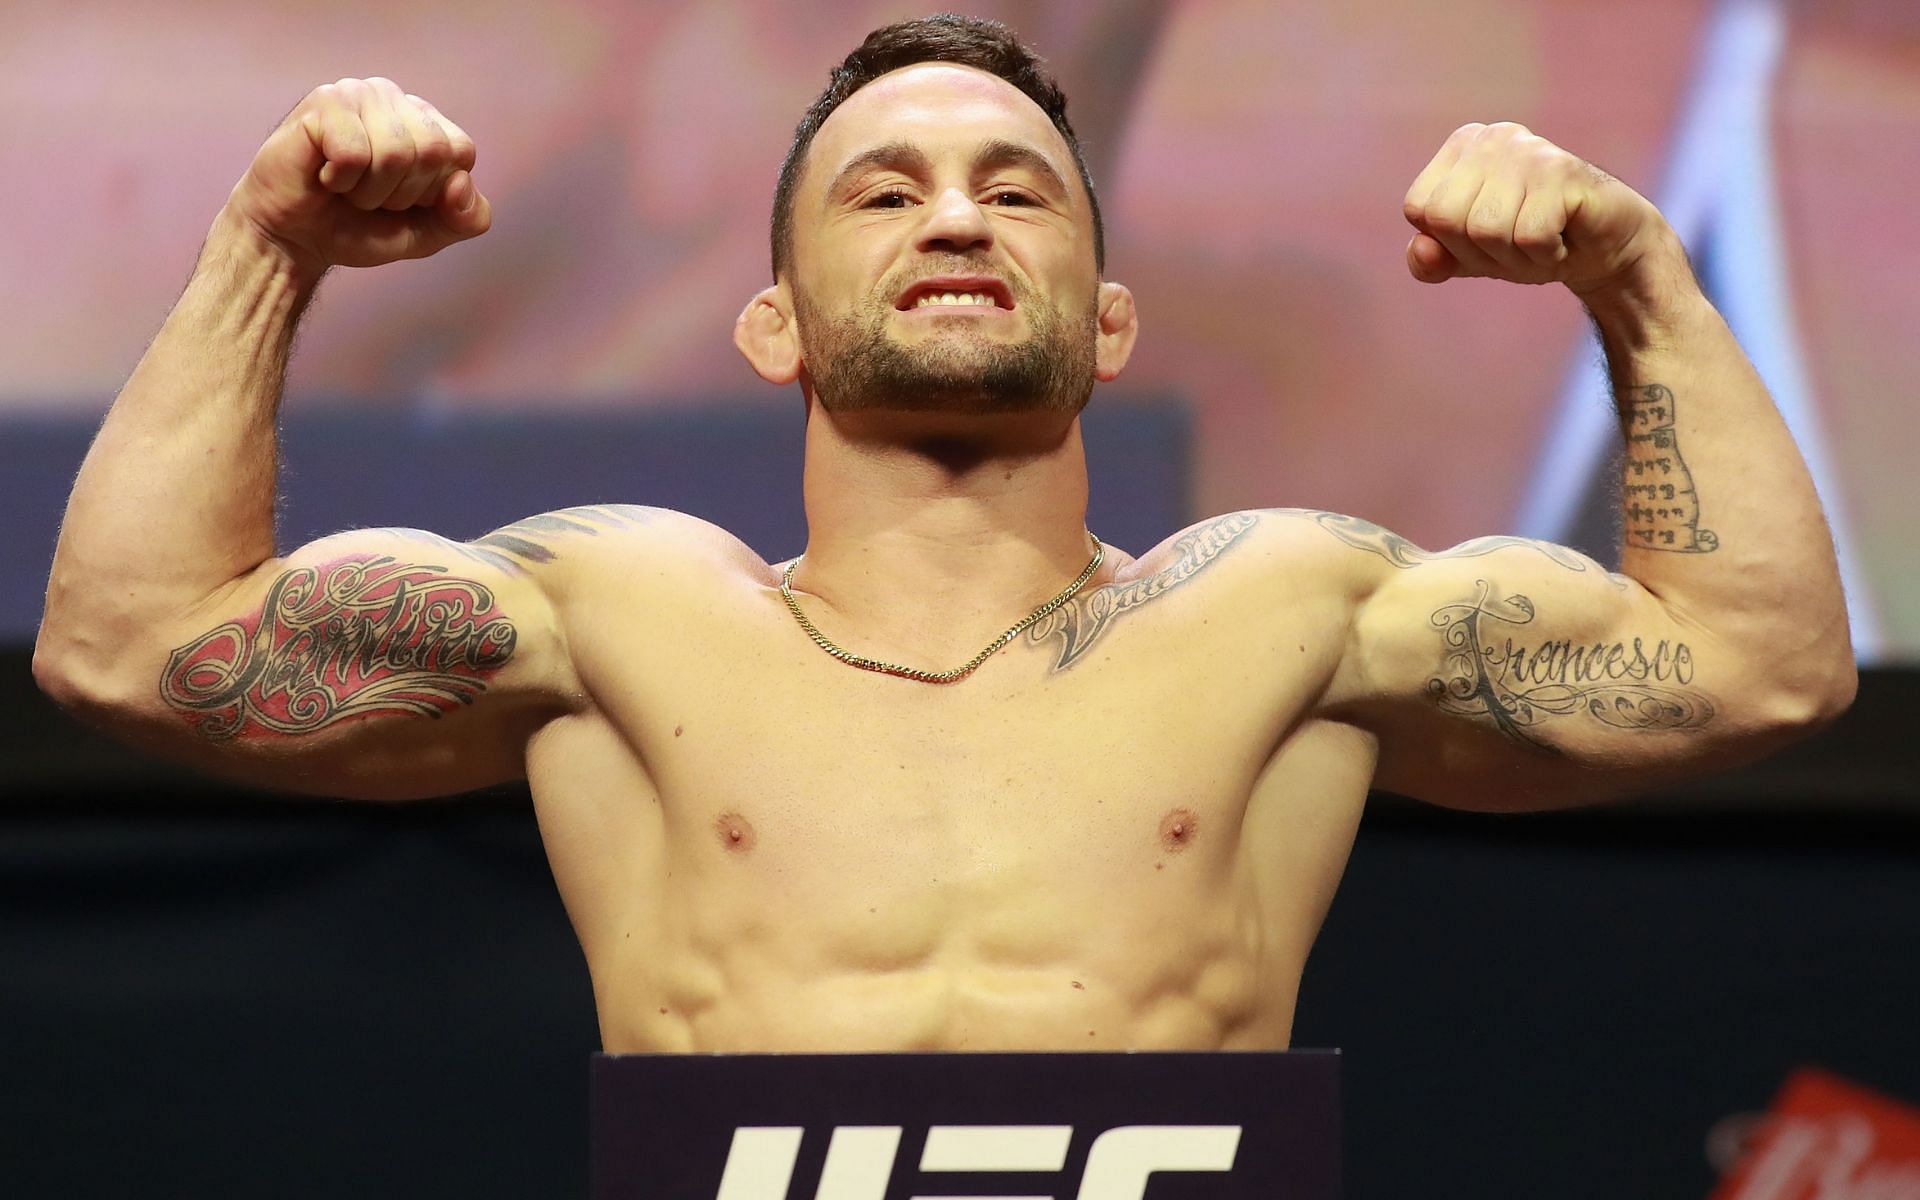 Multi-division MMA superstar Frankie Edgar at the UFC 205 weigh-in ahead of his encounter with Jeremy Stephens back in November 2016